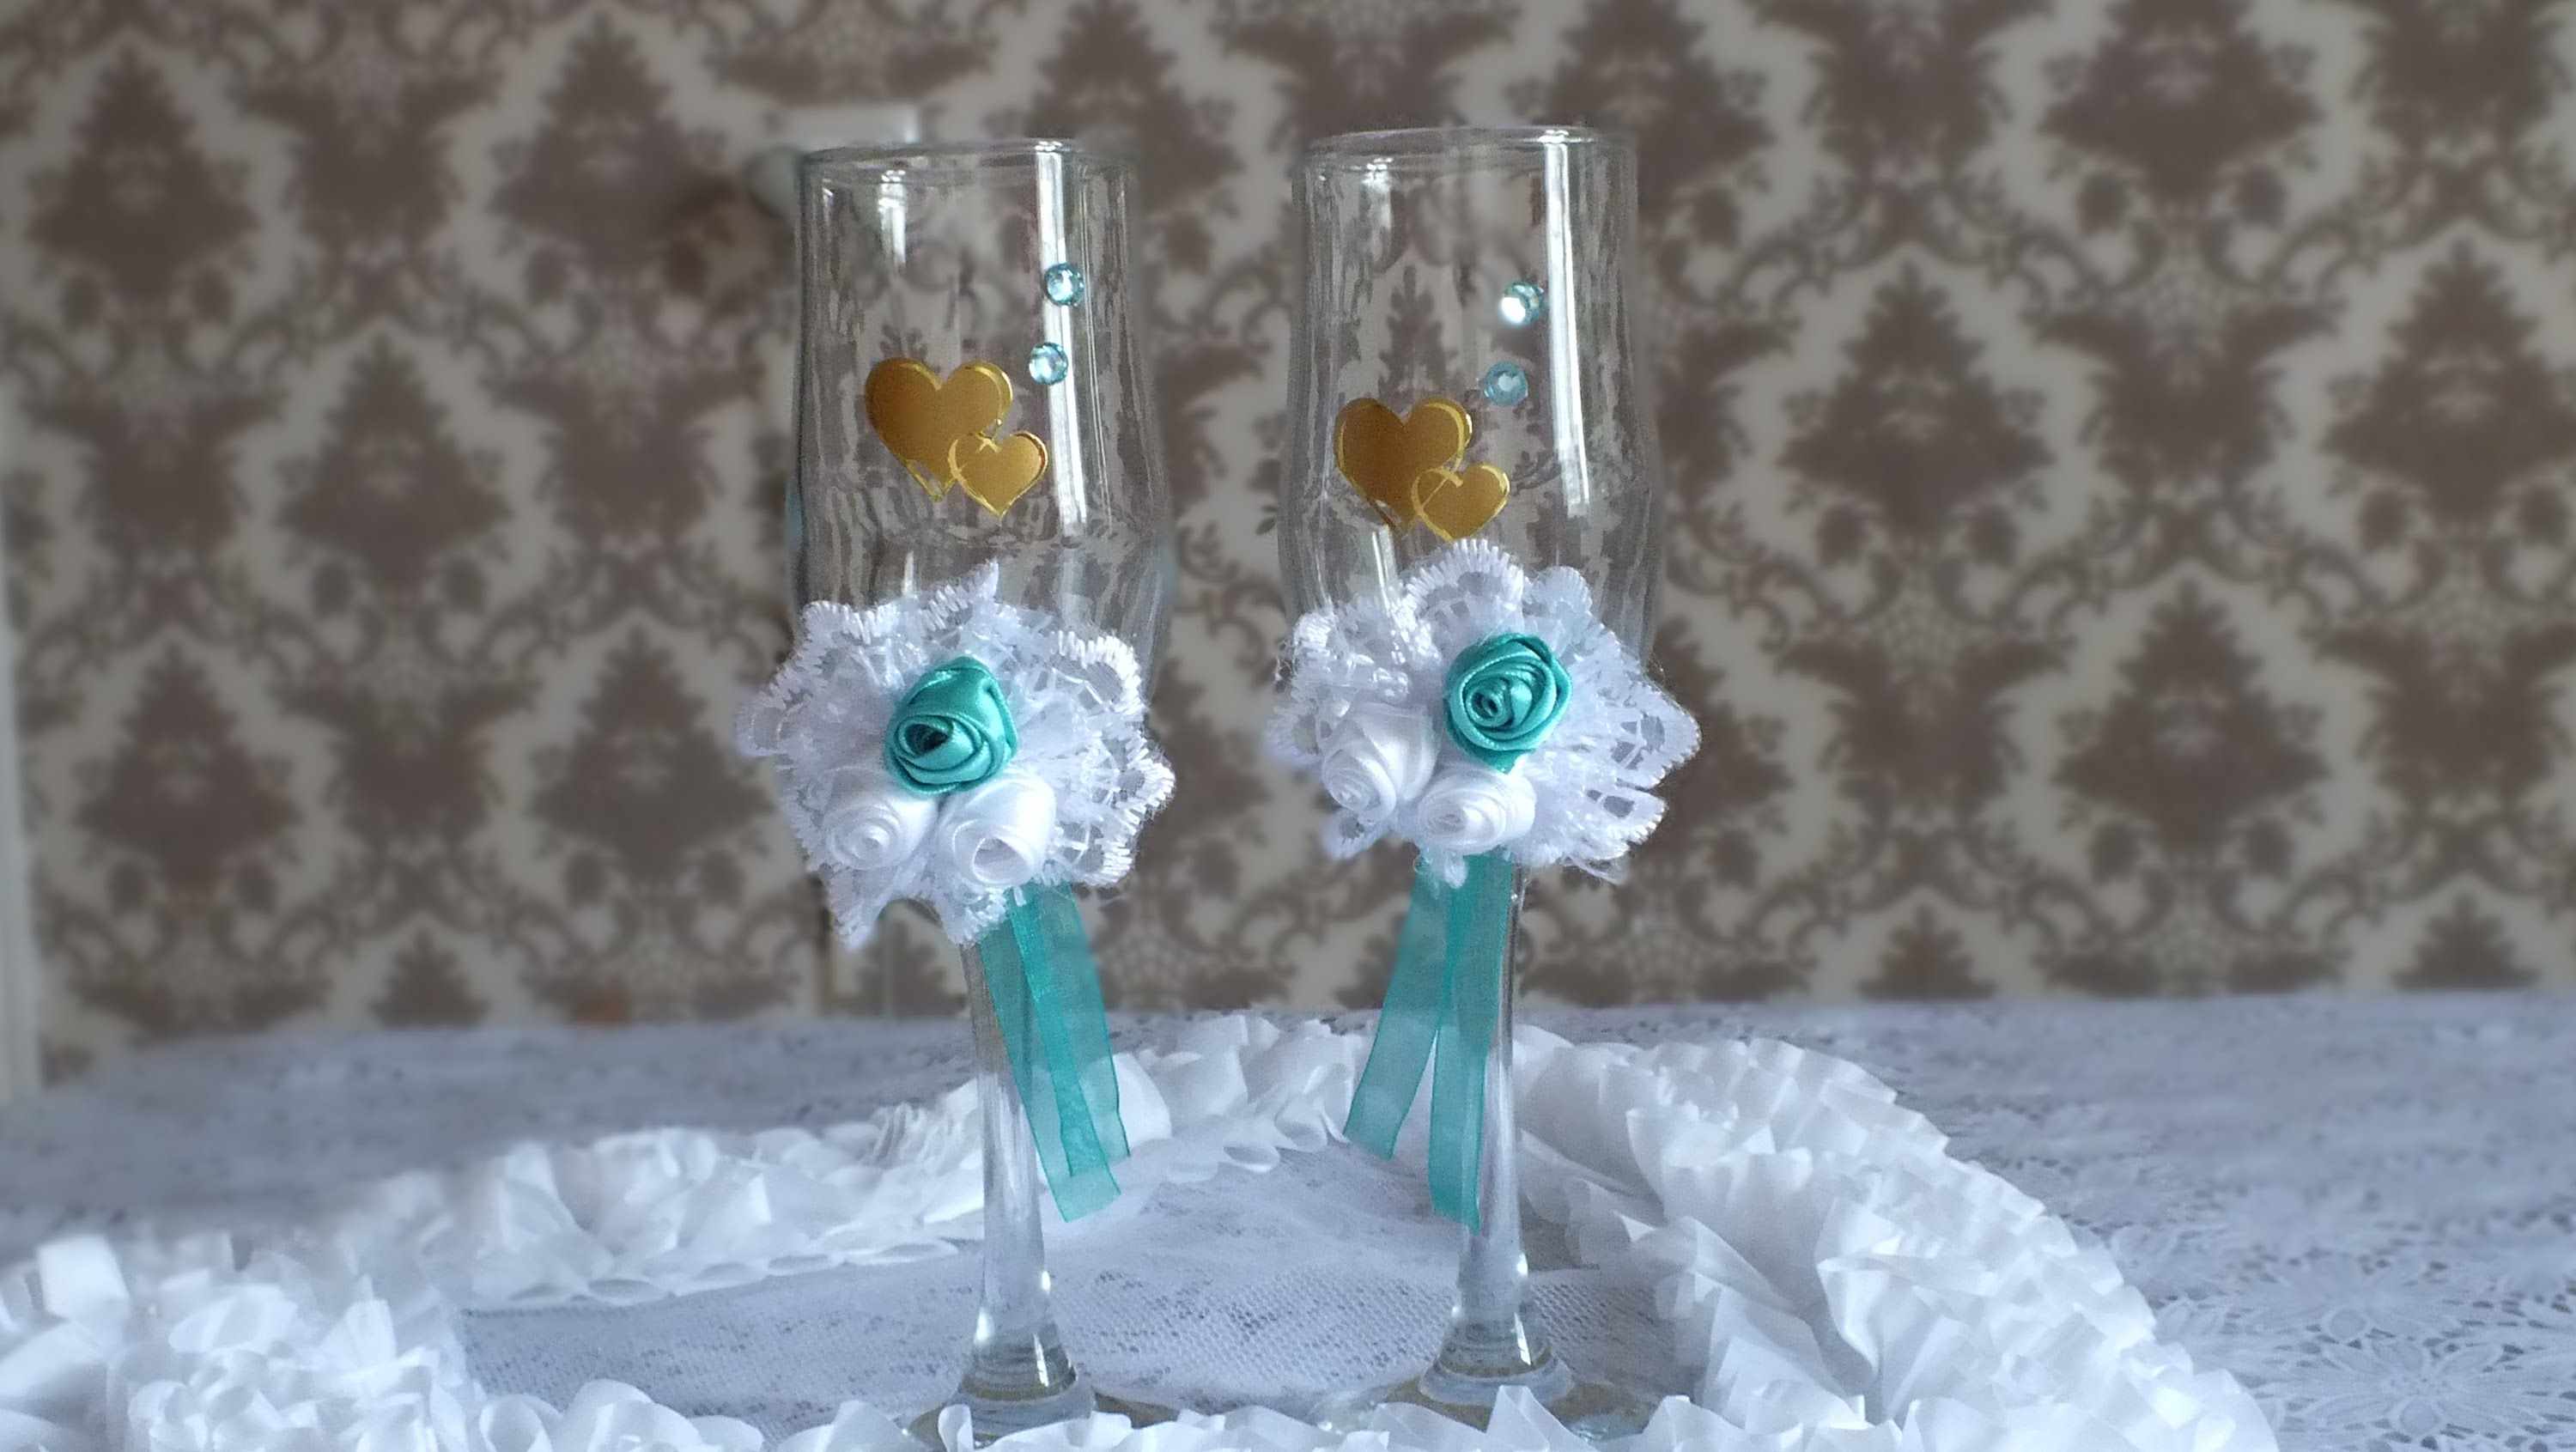 an example of unusual decoration of the style of wedding glasses